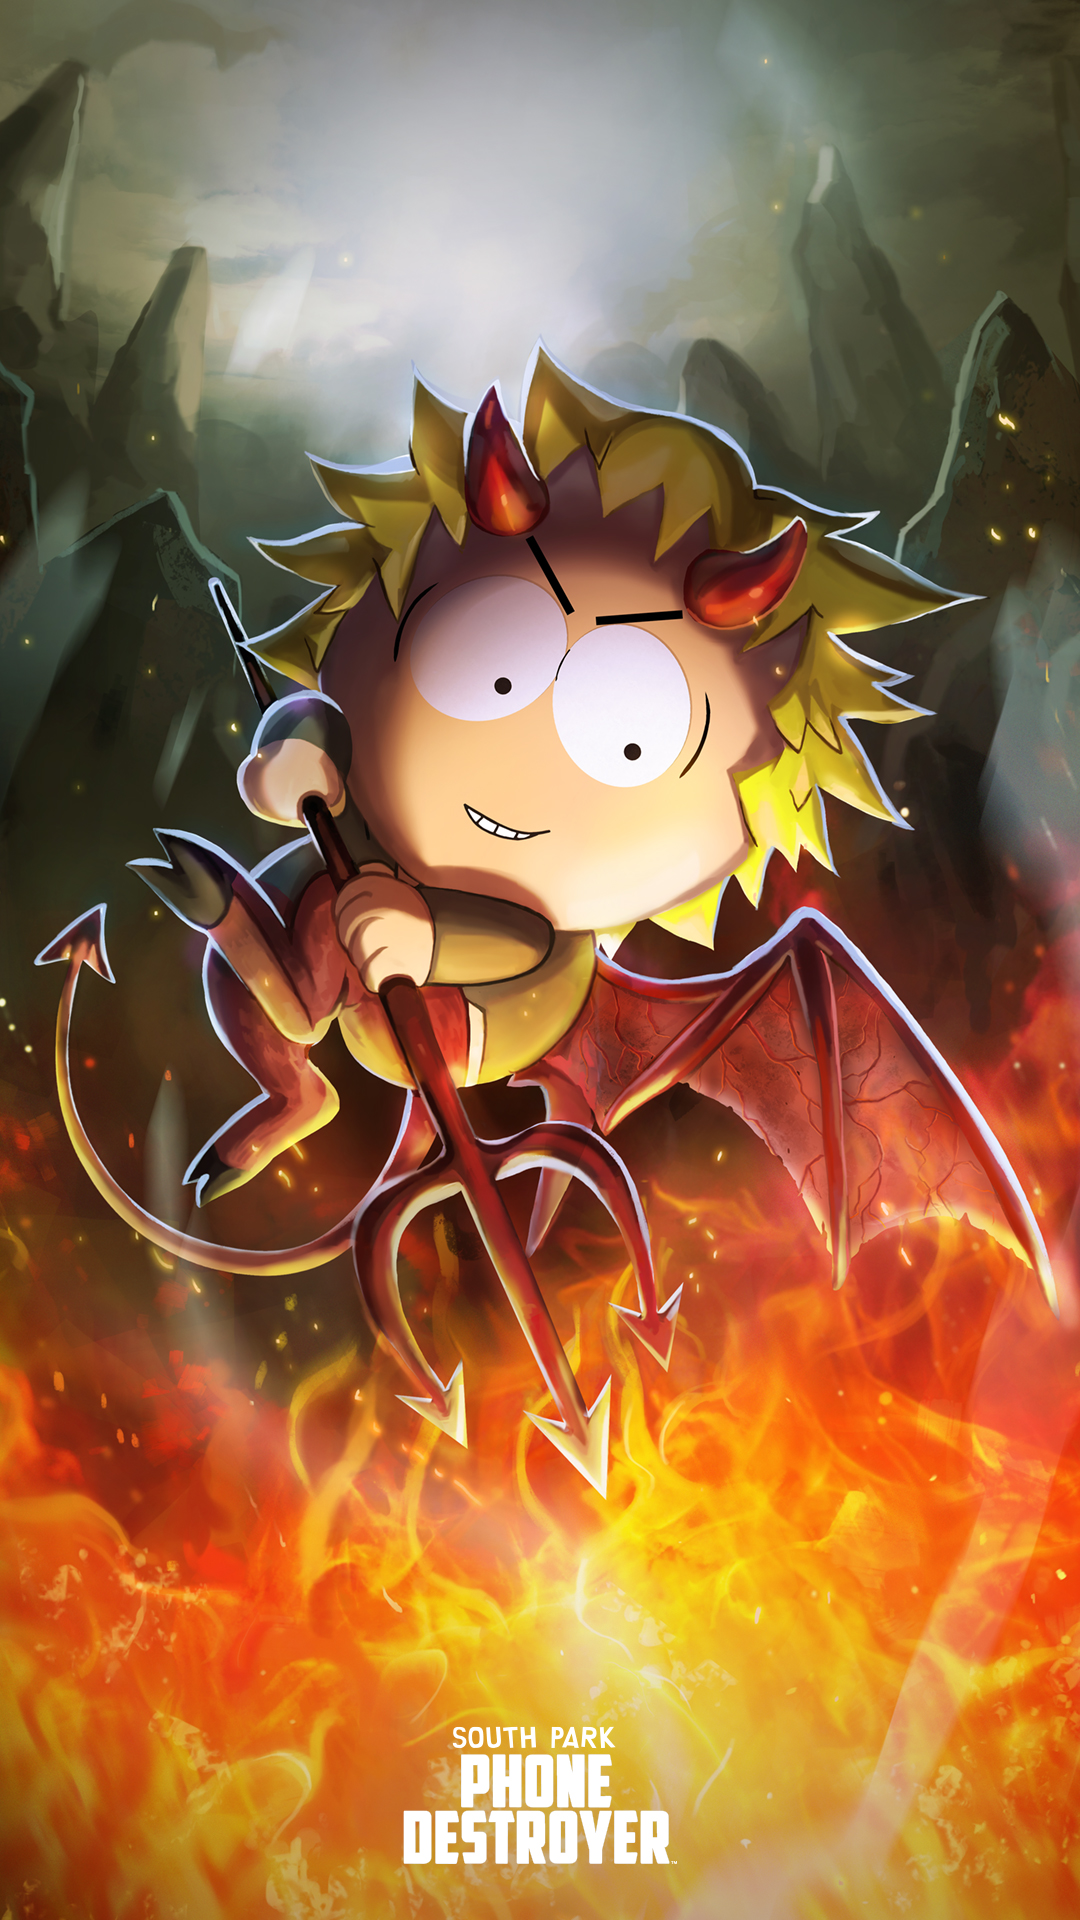 Phone Destroyer yourself Imp Tweek and Youth Pastor Craig wallpaper here so you can finish this weekend's event with style, New Kid!